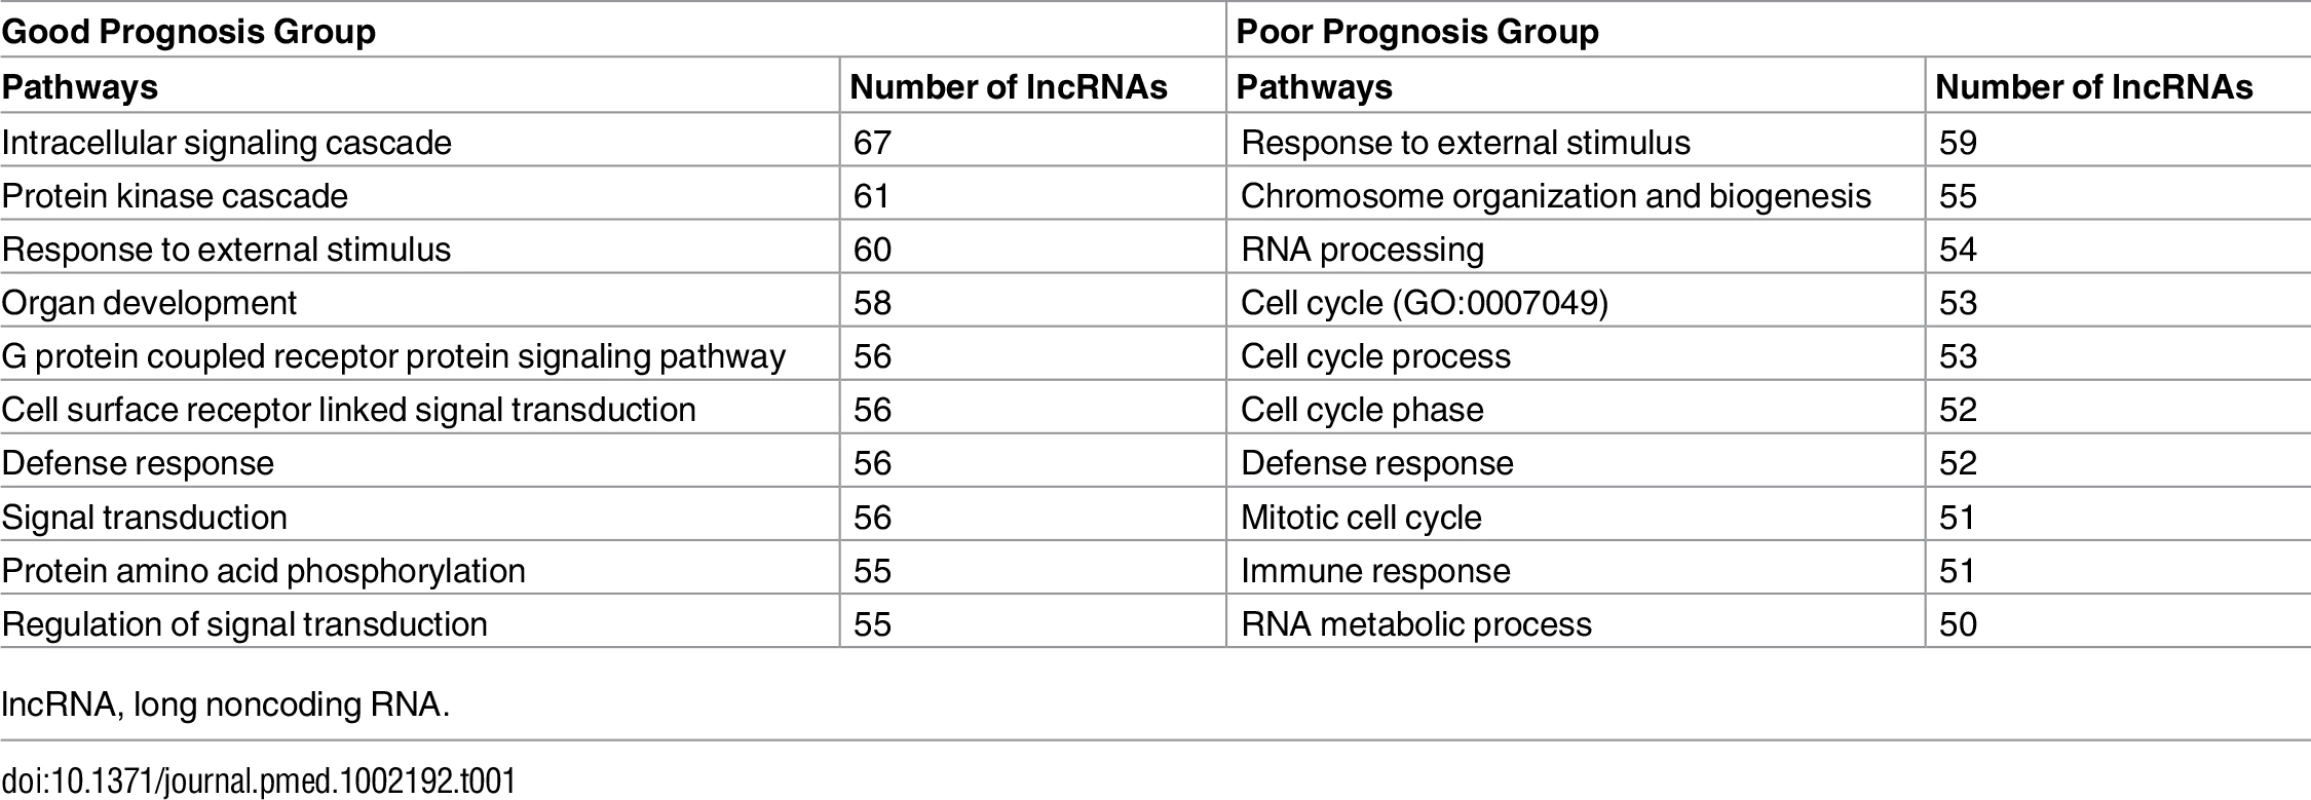 Enriched biological pathways associated with prognostic lncRNAs by guilt-by-association analysis.